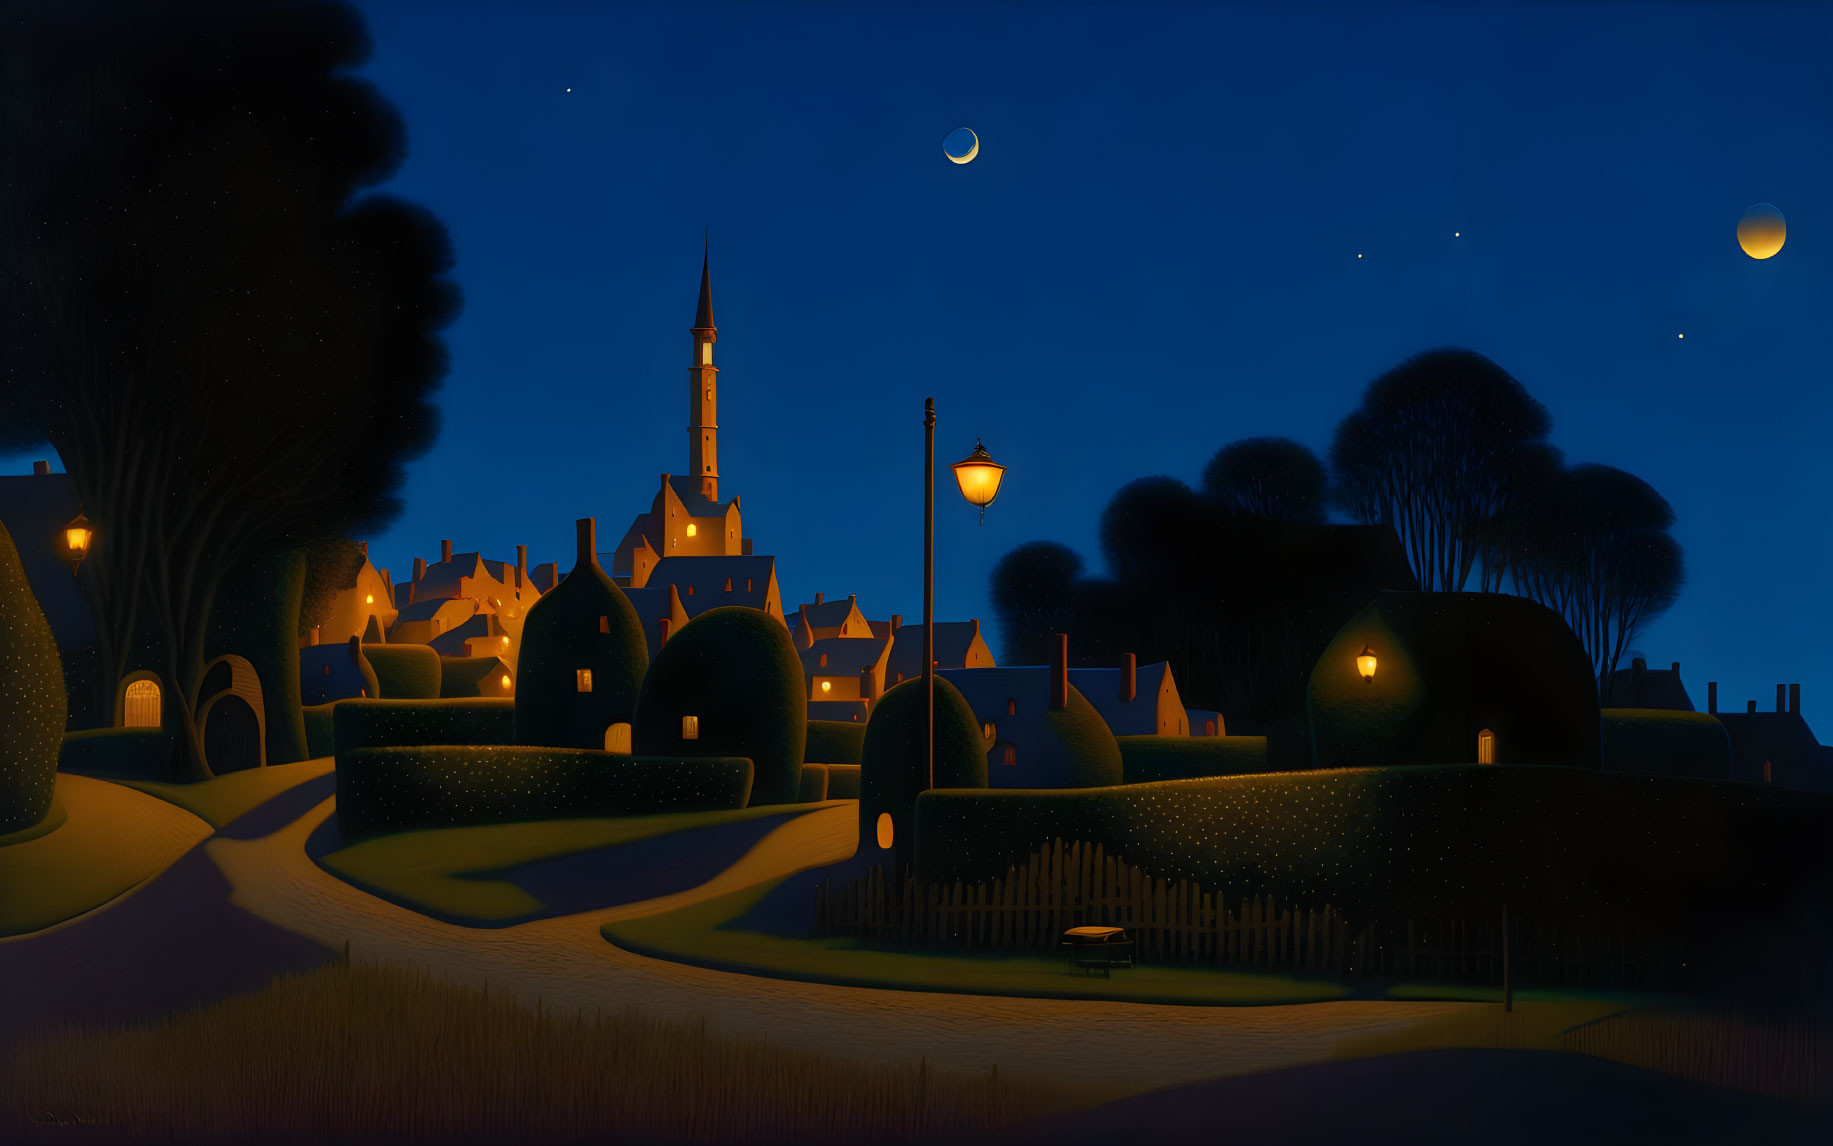 Stylized nocturnal landscape with rolling hills, illuminated houses, spire, trees, crescent